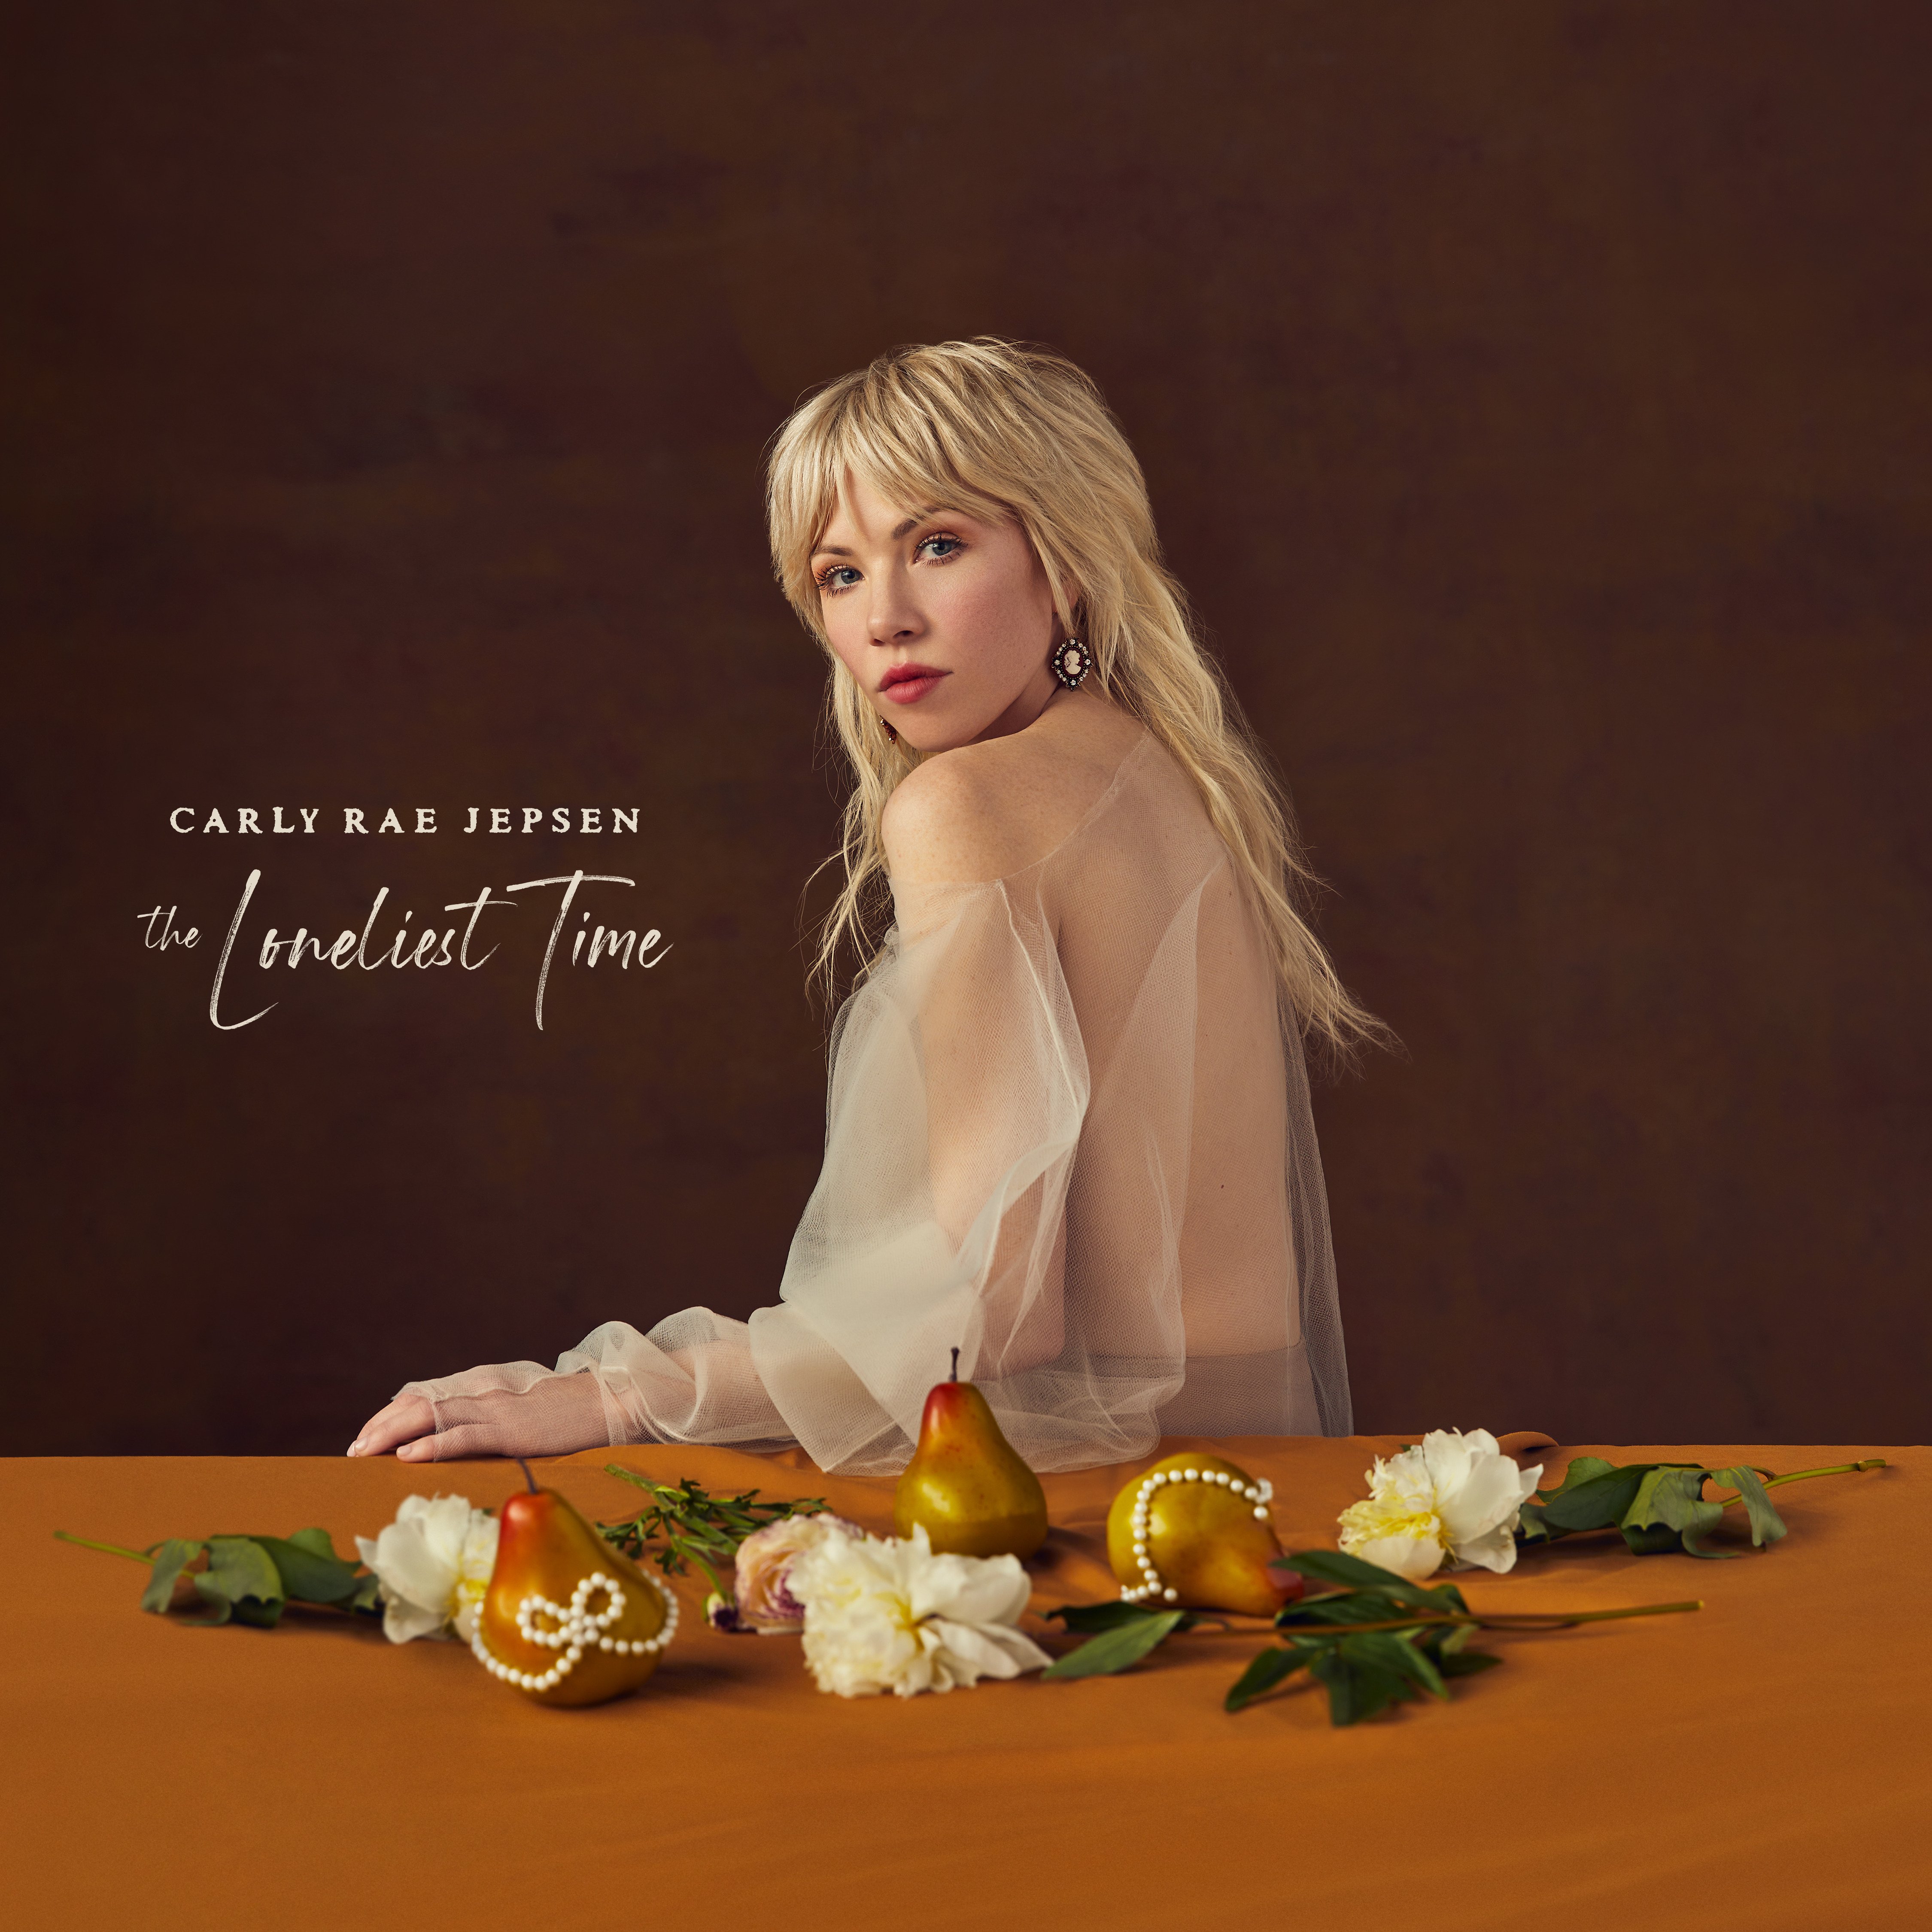 Carly Rae Jepsen - The Loneliest Time (2022) FLAC Download